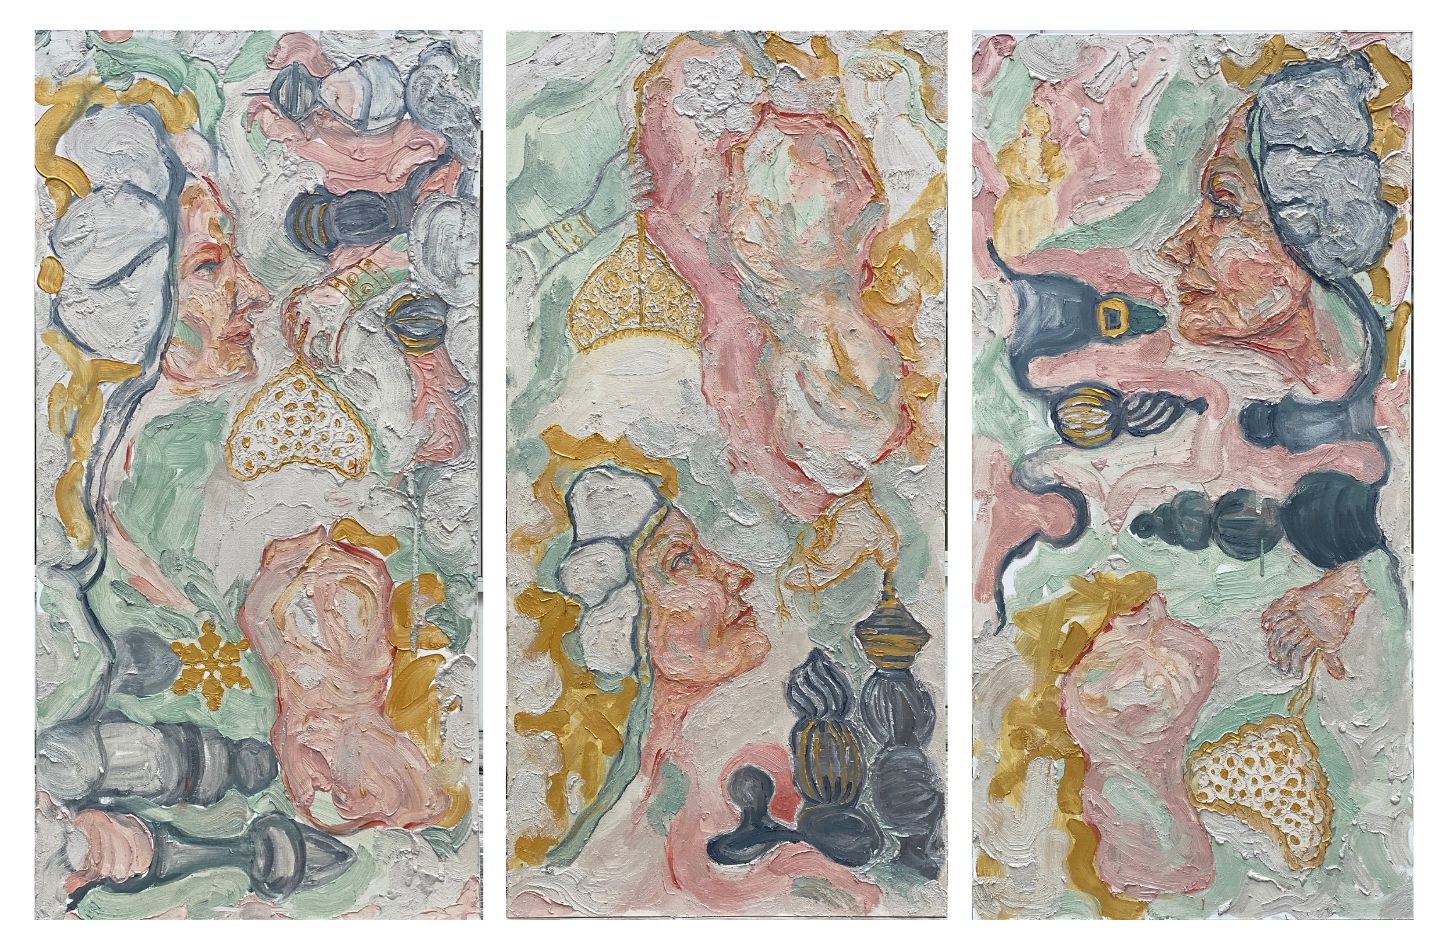 Dance Me To The End Of Love (Panels I-III), 2021, Oil Mica and Wax on Canvas, 3x6'